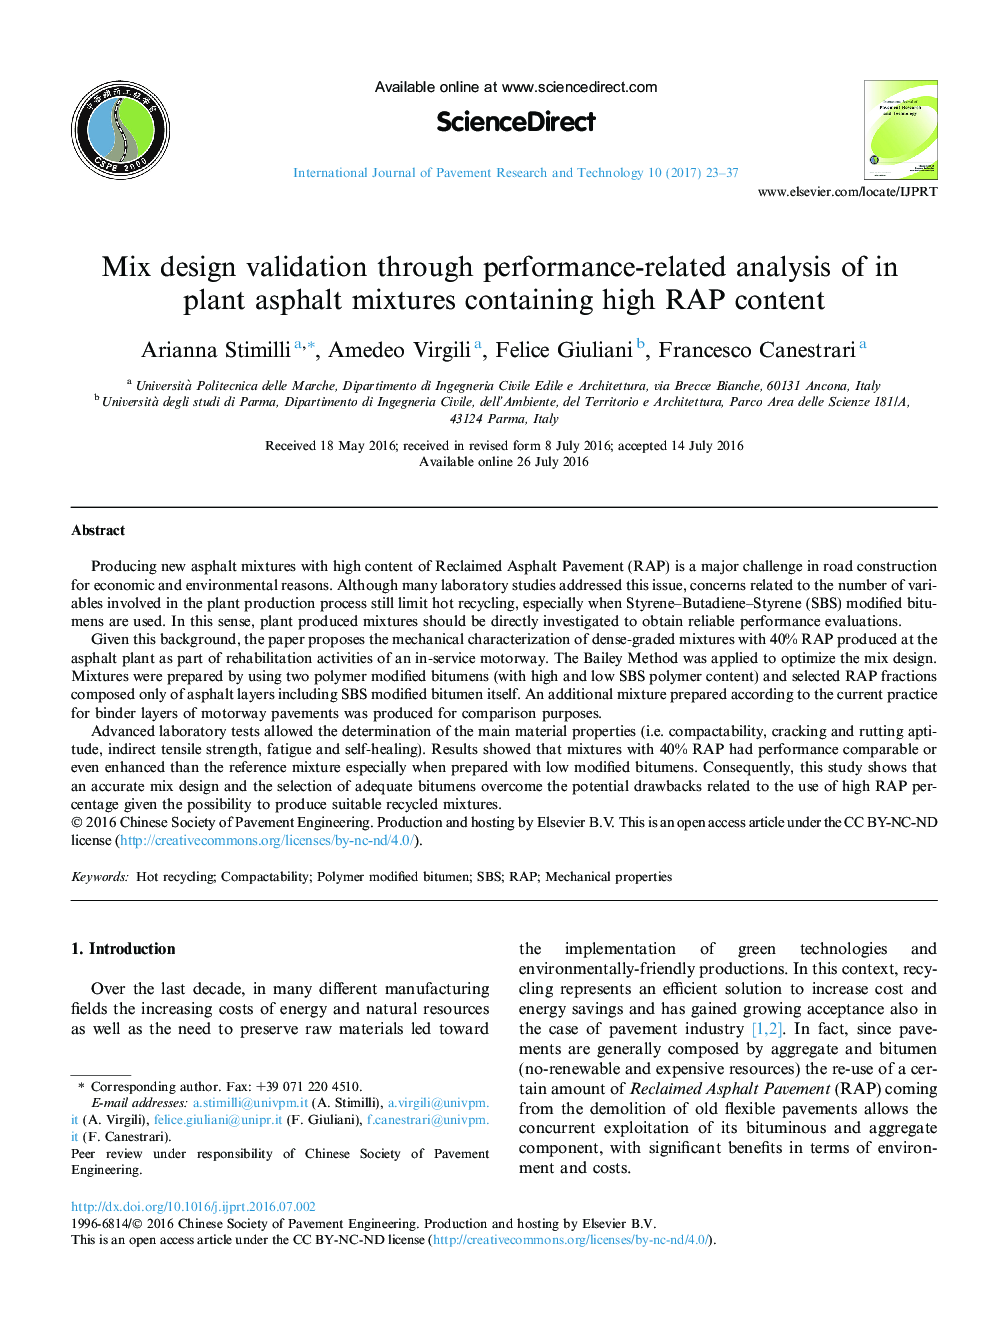 Mix design validation through performance-related analysis of in plant asphalt mixtures containing high RAP content